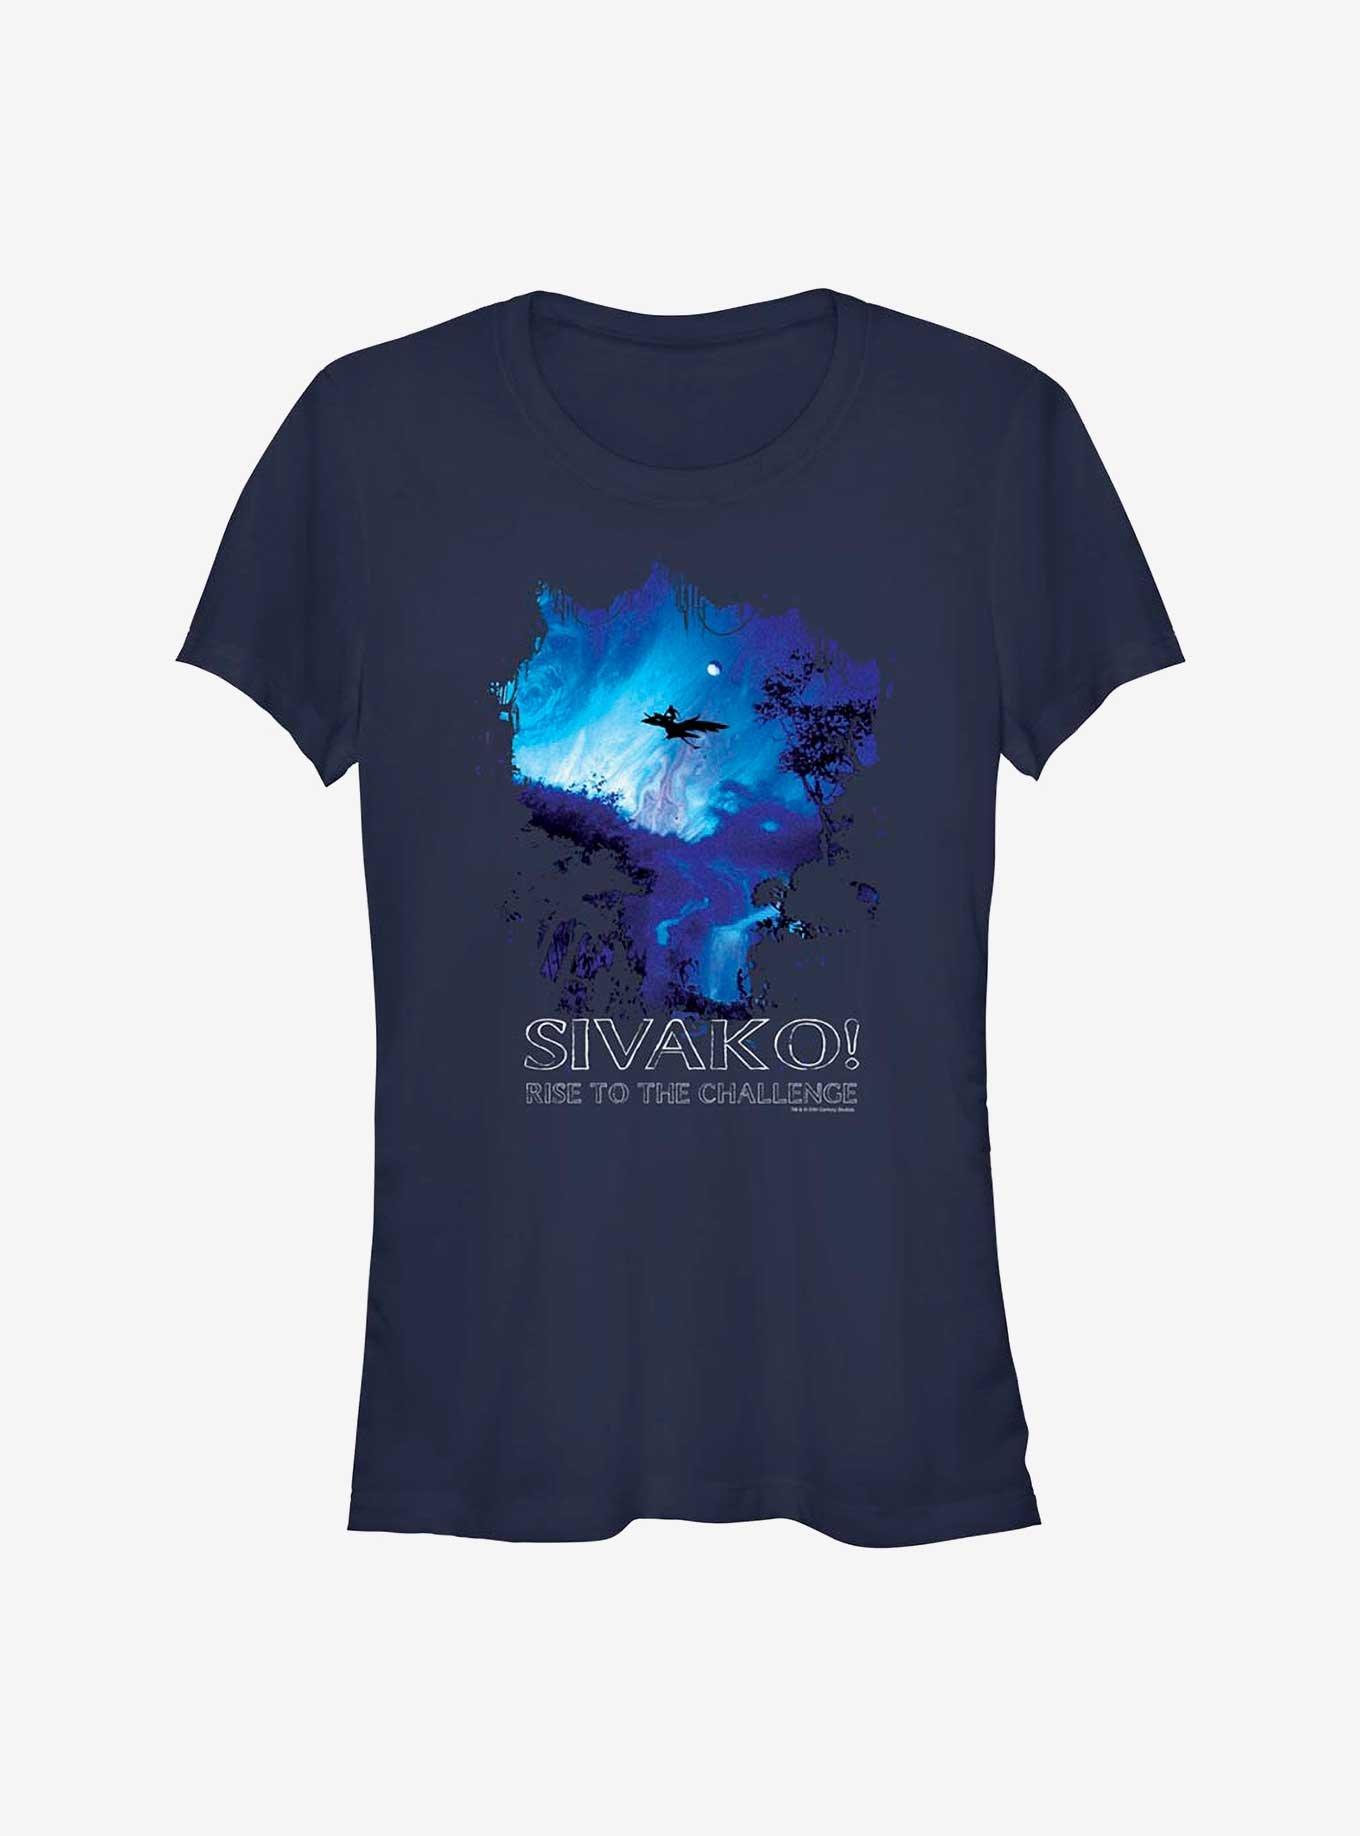 Avatar Rise To The Challenge Girls T-Shirt, NAVY, hi-res